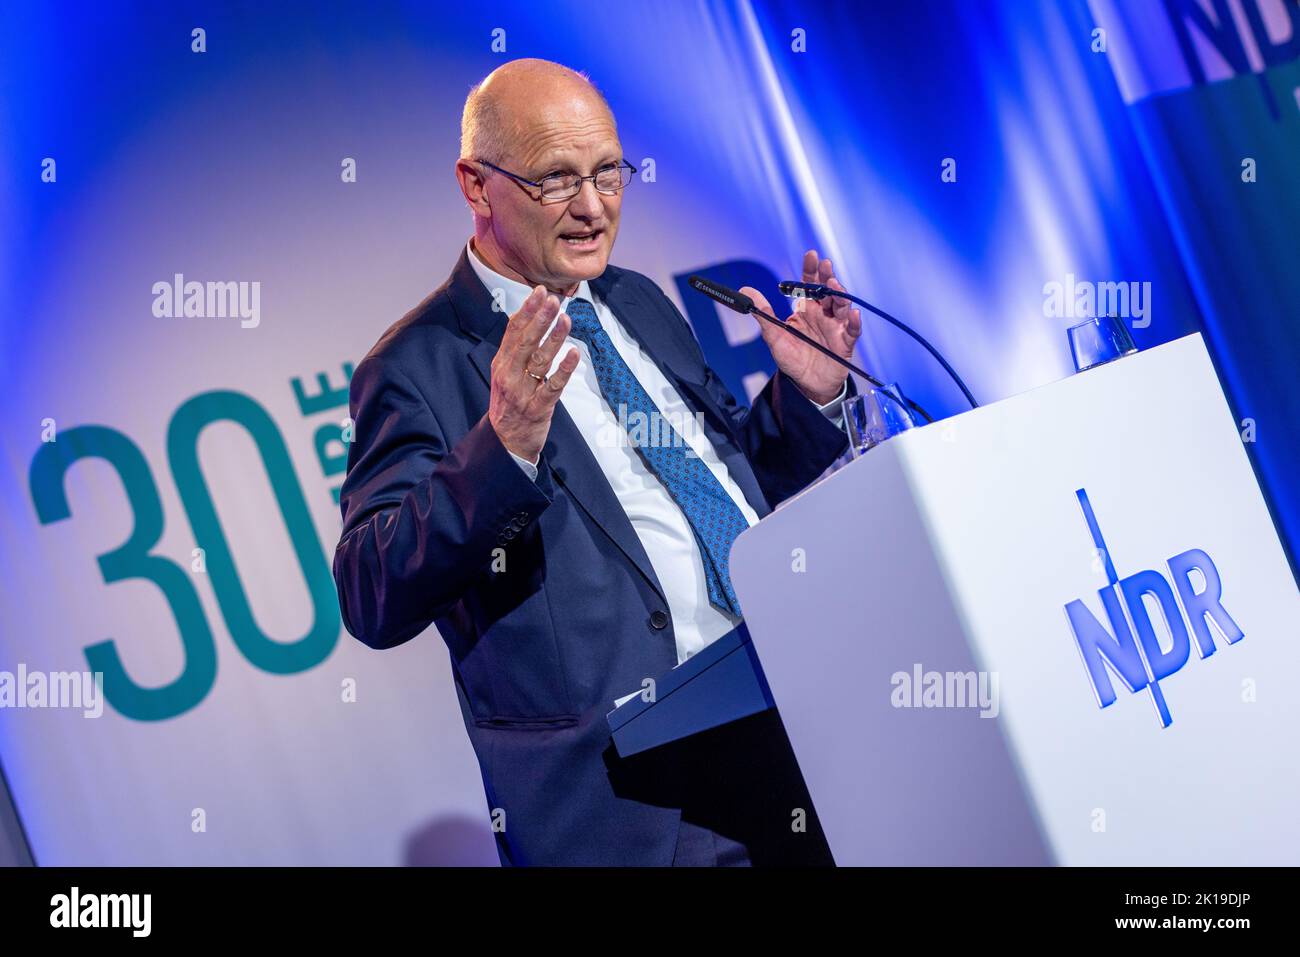 Schwerin, Germany. 16th Sep, 2022. Joachim Knuth, Director-General of  Norddeutscher Rundfunk, speaks at the celebratory event "30 Years of NDR in  Mecklenburg-Vorpommern". On 01.01.1992, NDR began producing television and  radio programs for